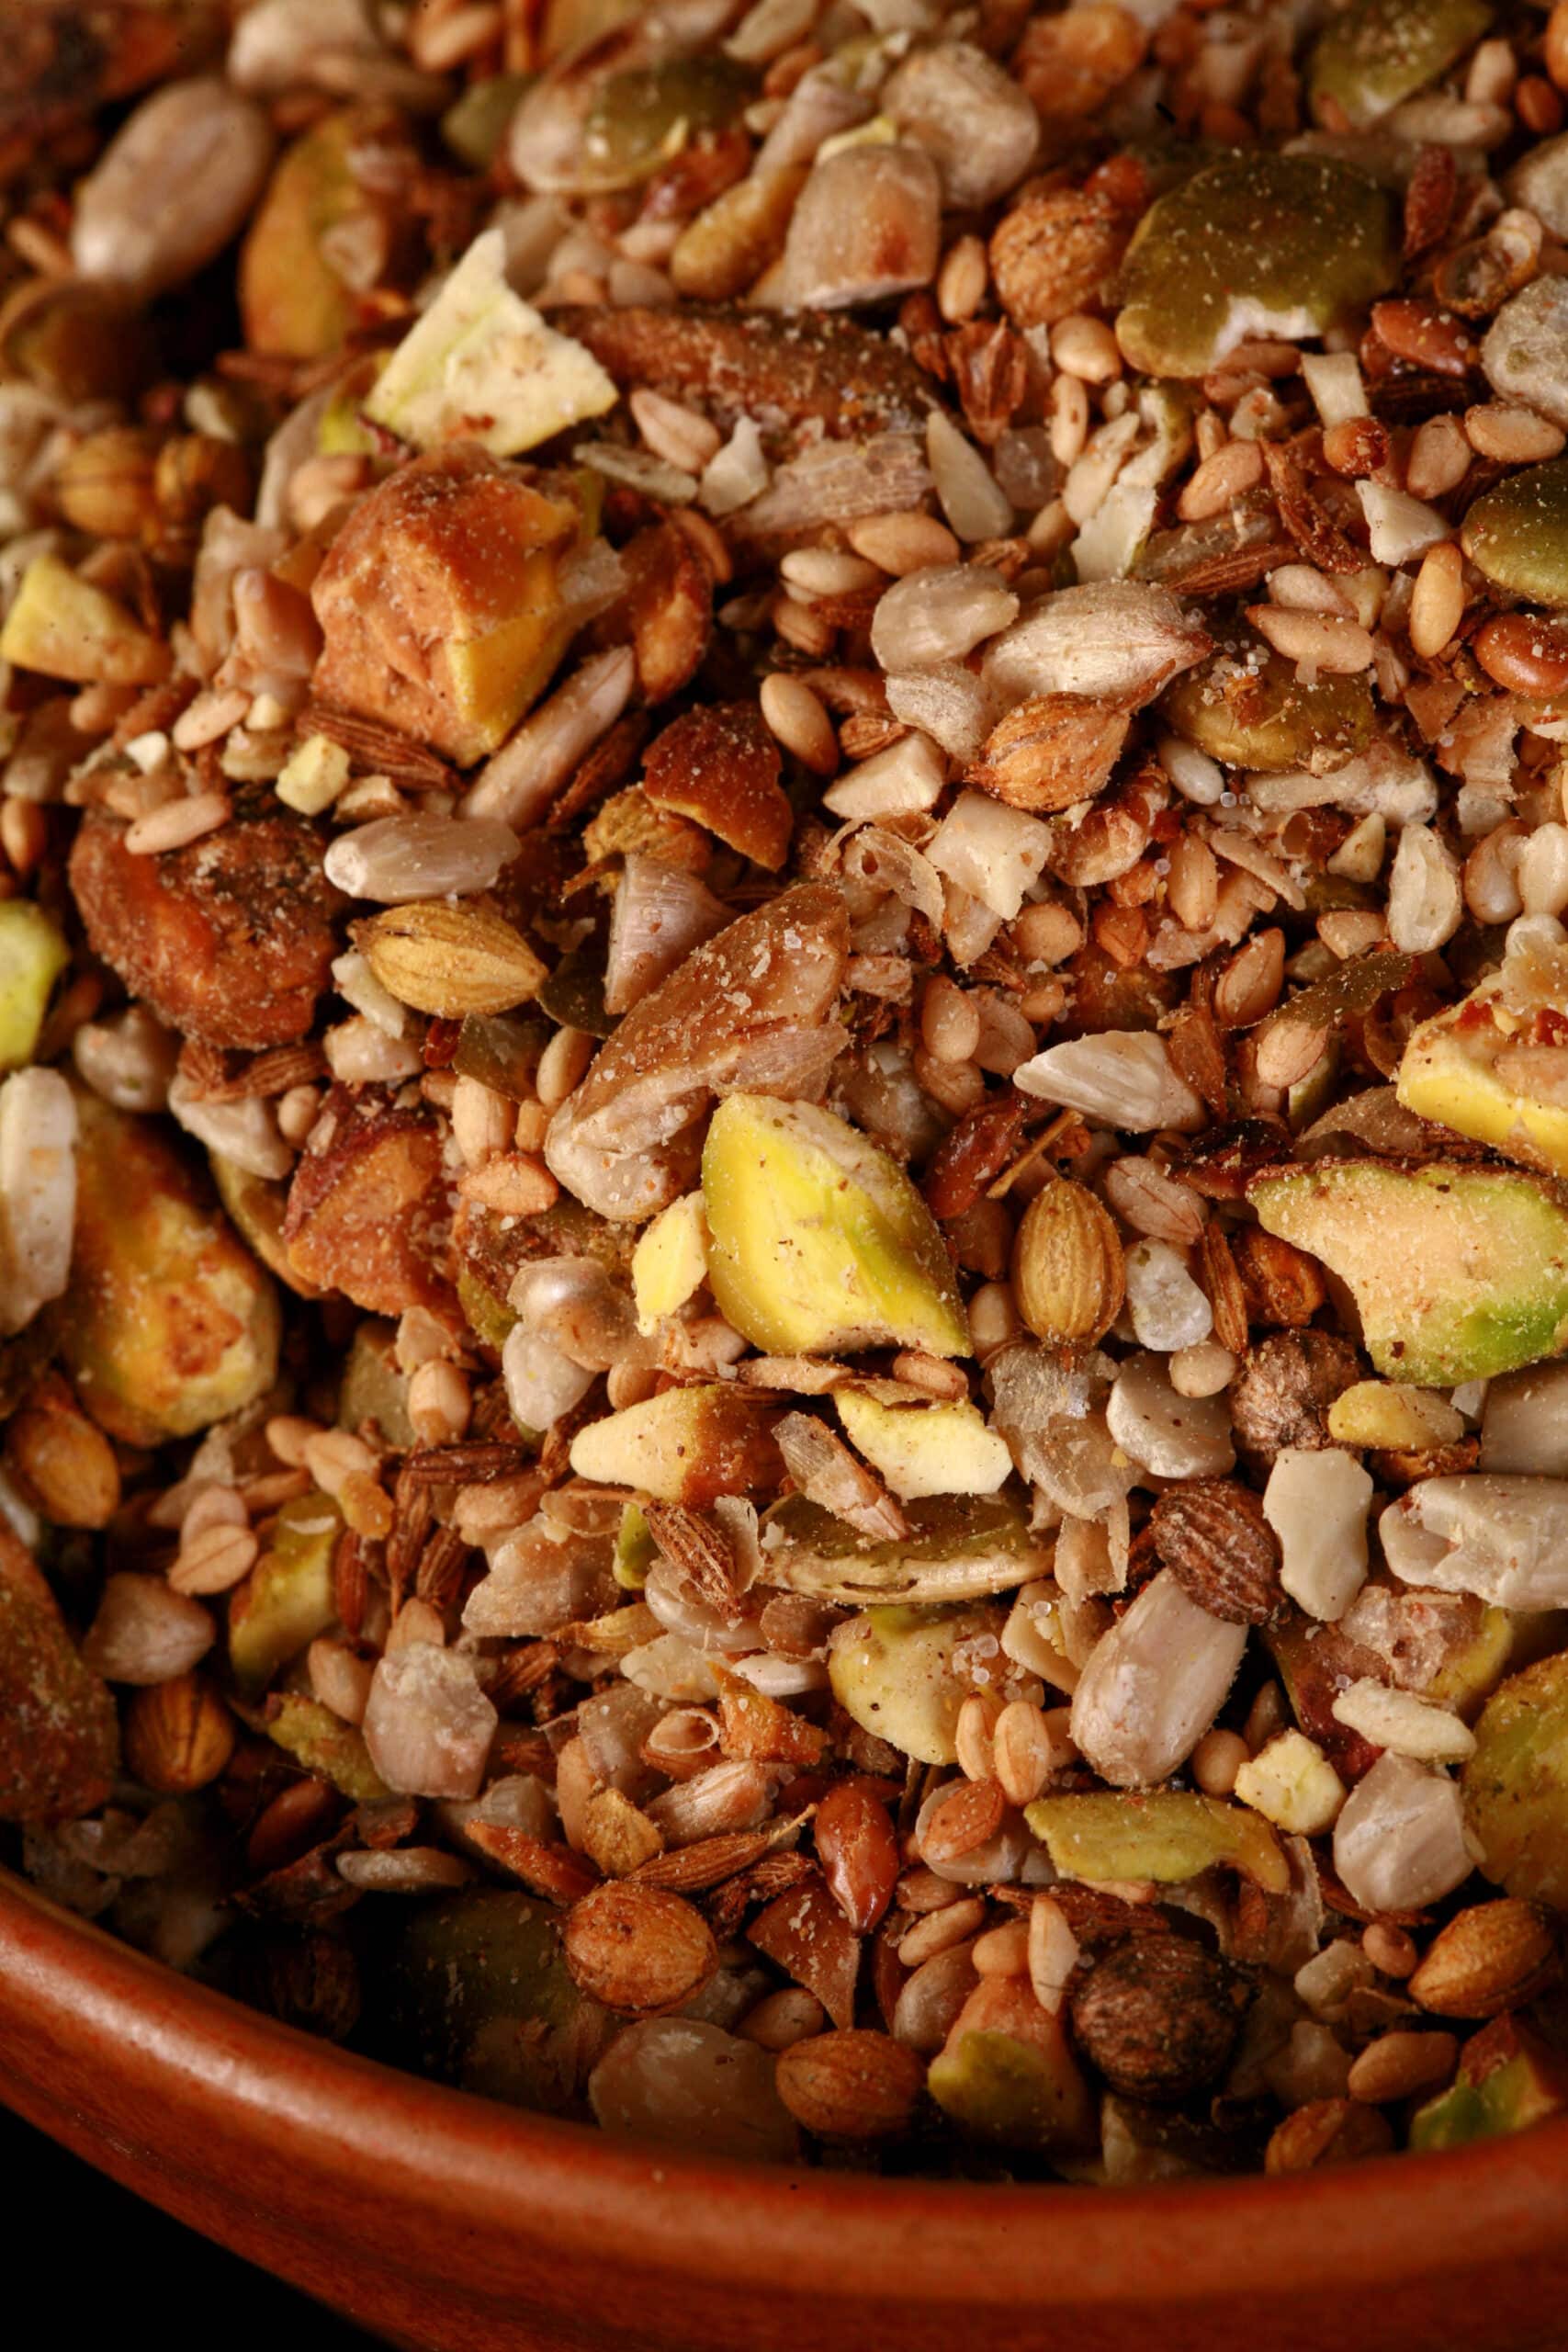 A small brown bowl of pistachio dukkag spice mix.